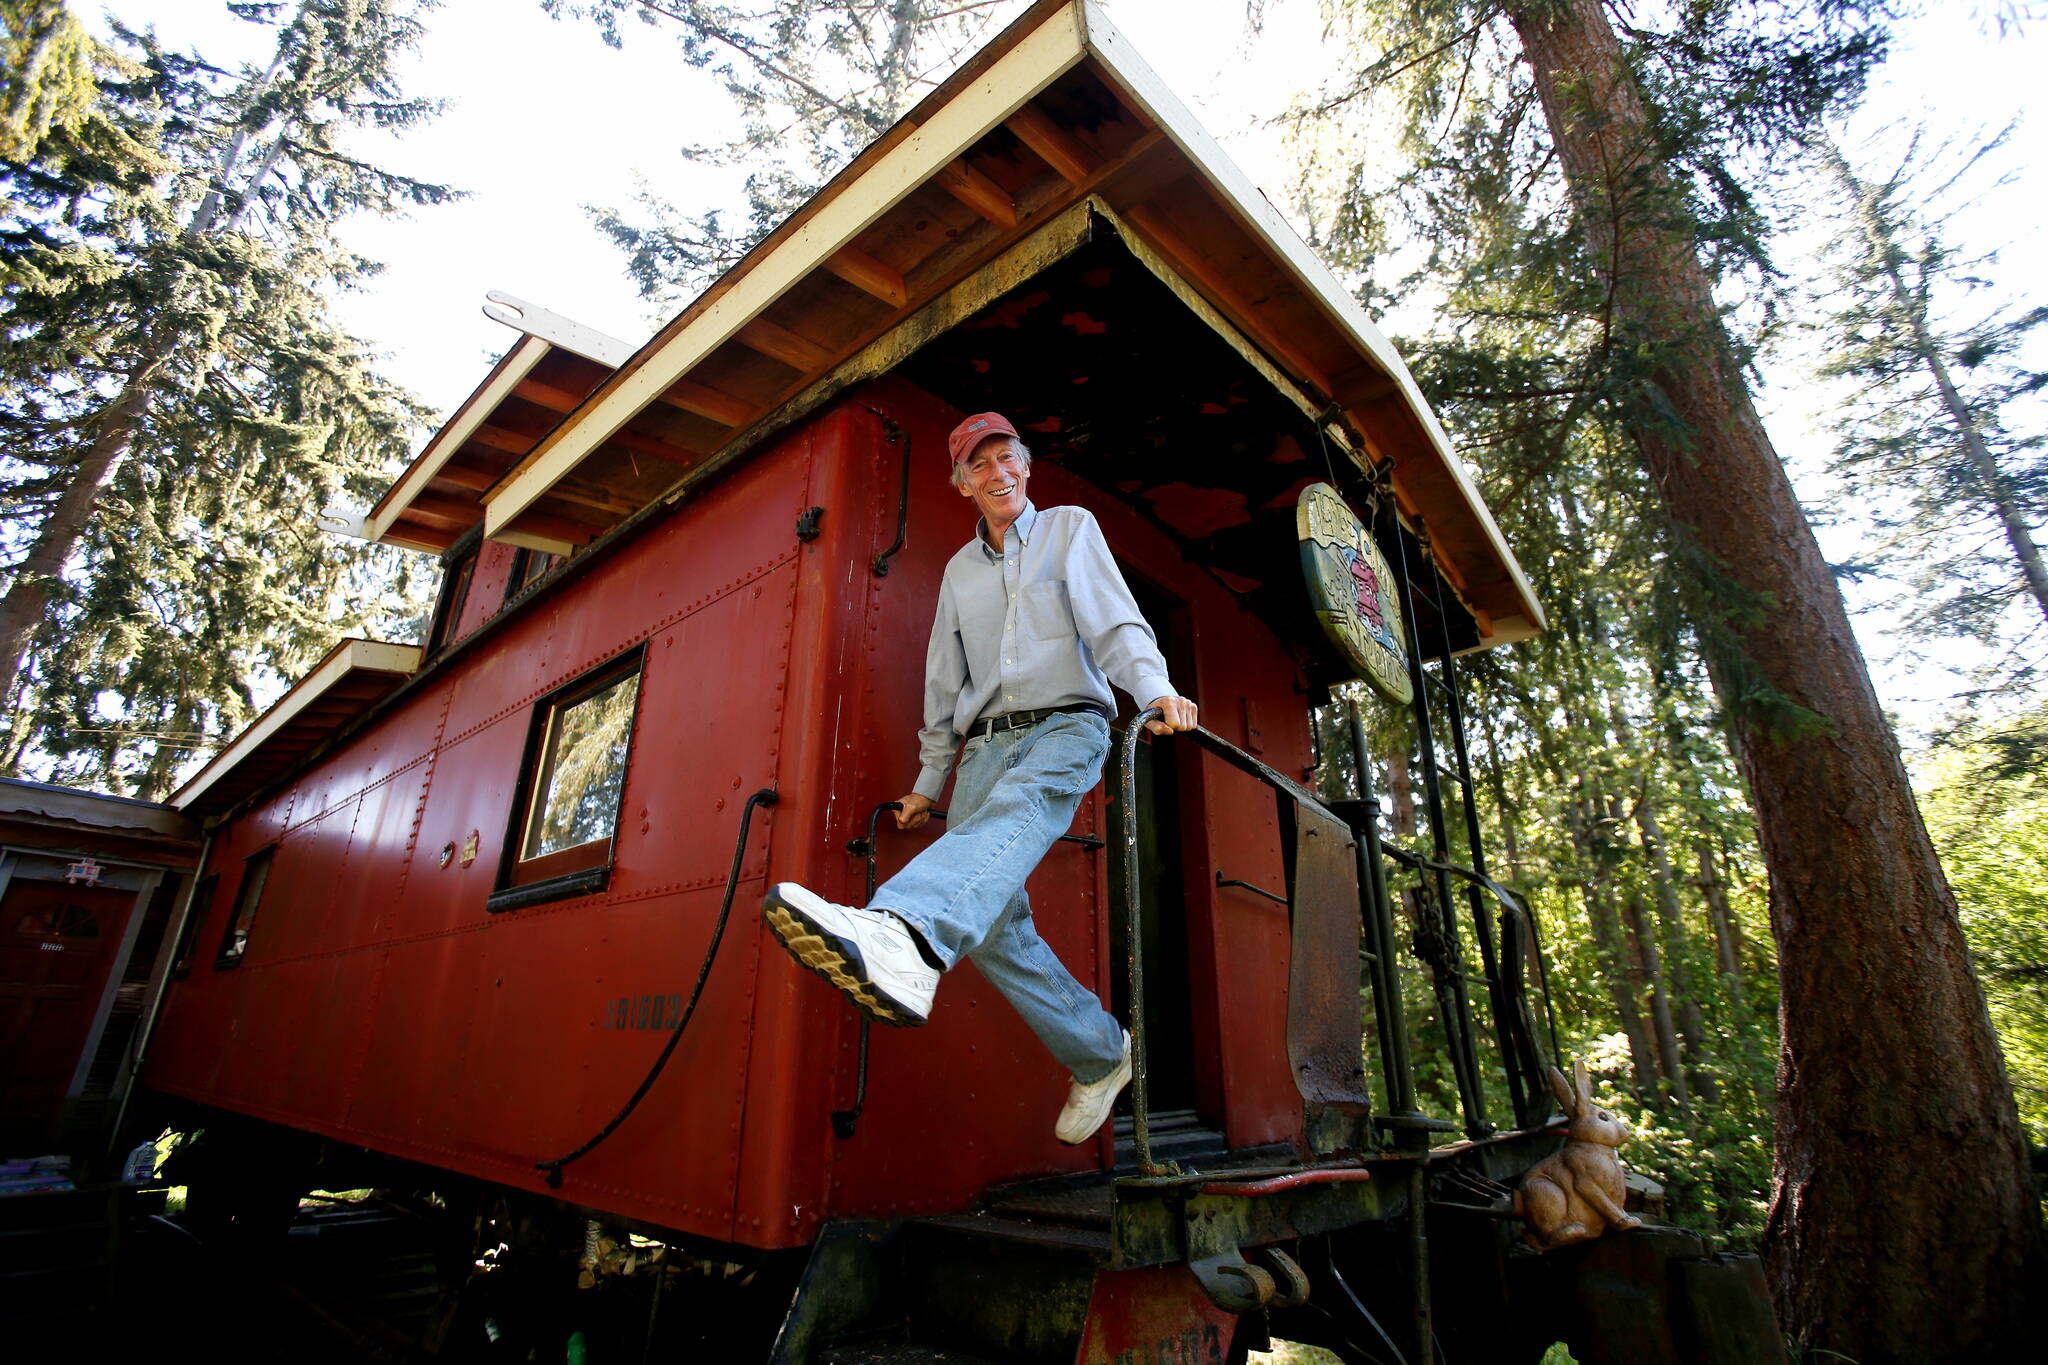 Pedaling his legs as he holds onto hand rails, Whidbey Island celebrity Jim Freeman at his home, a railroad caboose in Freeland, in 2016. Freeman, known as the Conductor of Fun, died June 19, 2022. (Andy Bronson / The Herald)